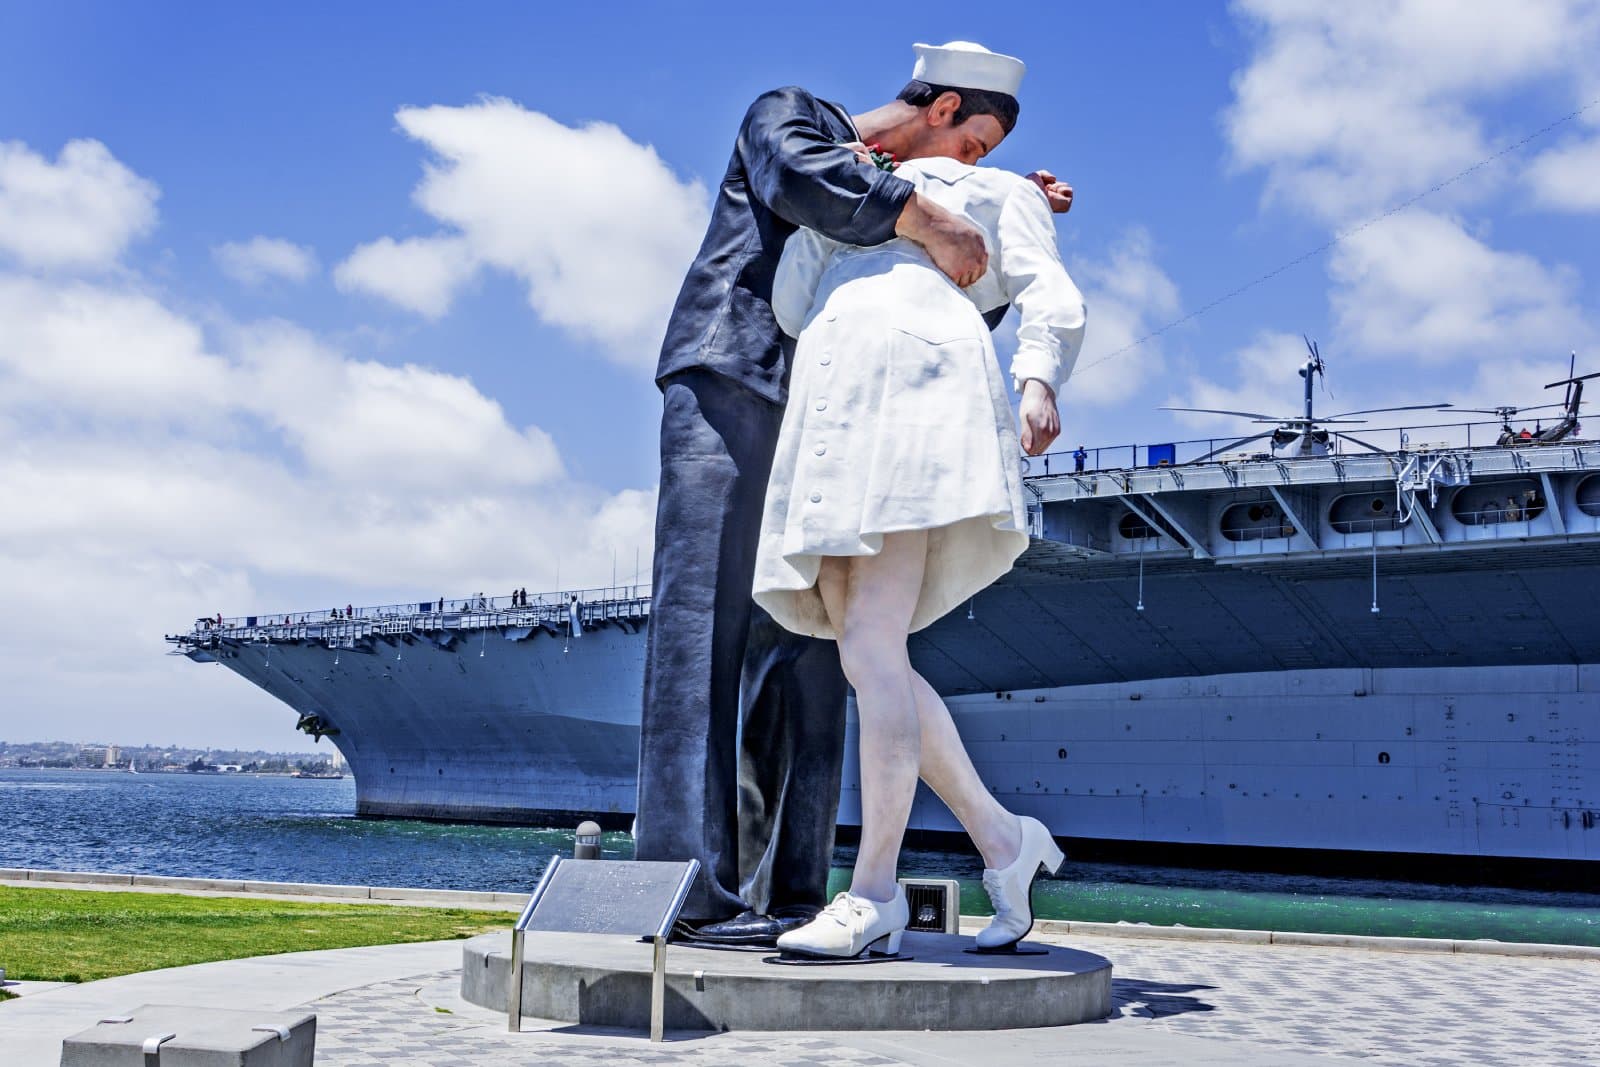 <p class="wp-caption-text">Image Credit: Shutterstock / randy andy</p>  <p>Located aboard the aircraft carrier Midway, the museum offers a dynamic and enriching experience through numerous restored aircraft, exhibits, and interactive experiences, highlighting the carrier’s role from WWII through Operation Desert Storm.</p>